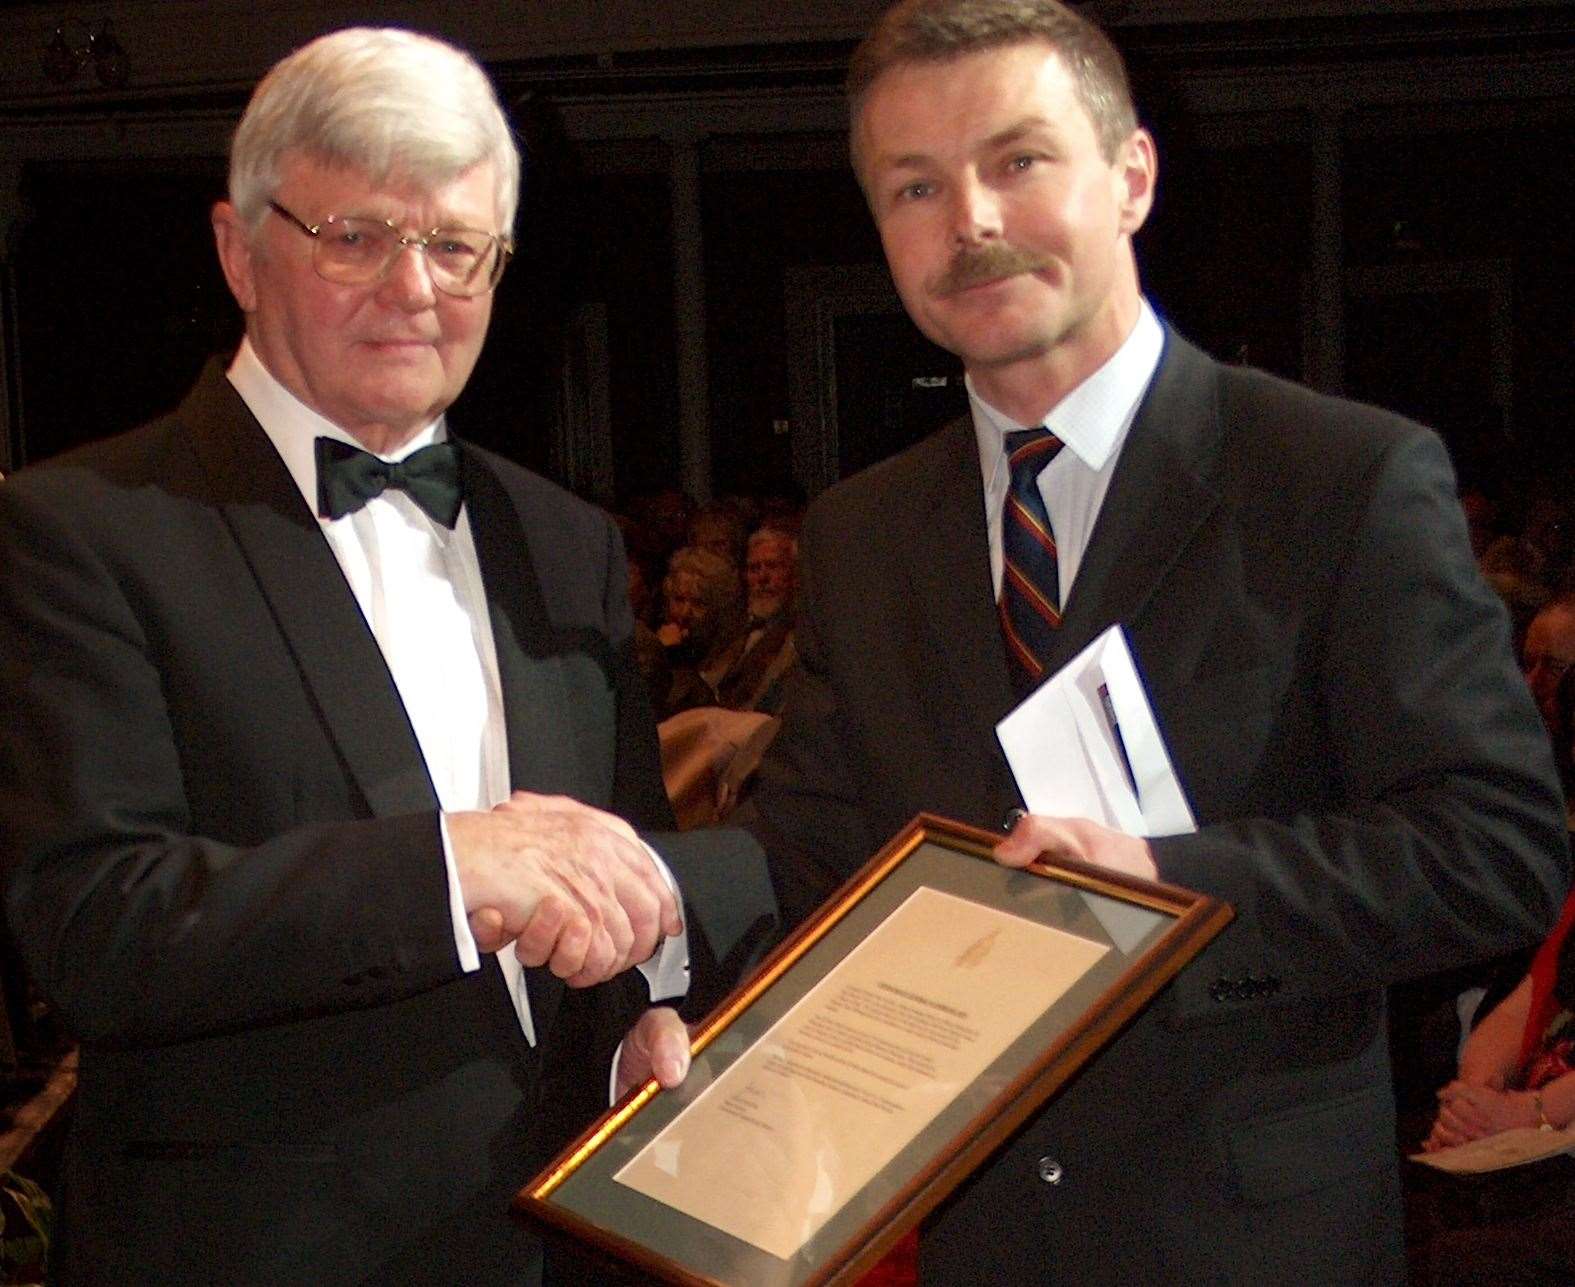 Principal Director of Music Royal Marines Lt Col Chris Davis, on the right, presents Lt Co Paul Neville with the Commandant General's Commendation in 2005. Picture: Steve Misson